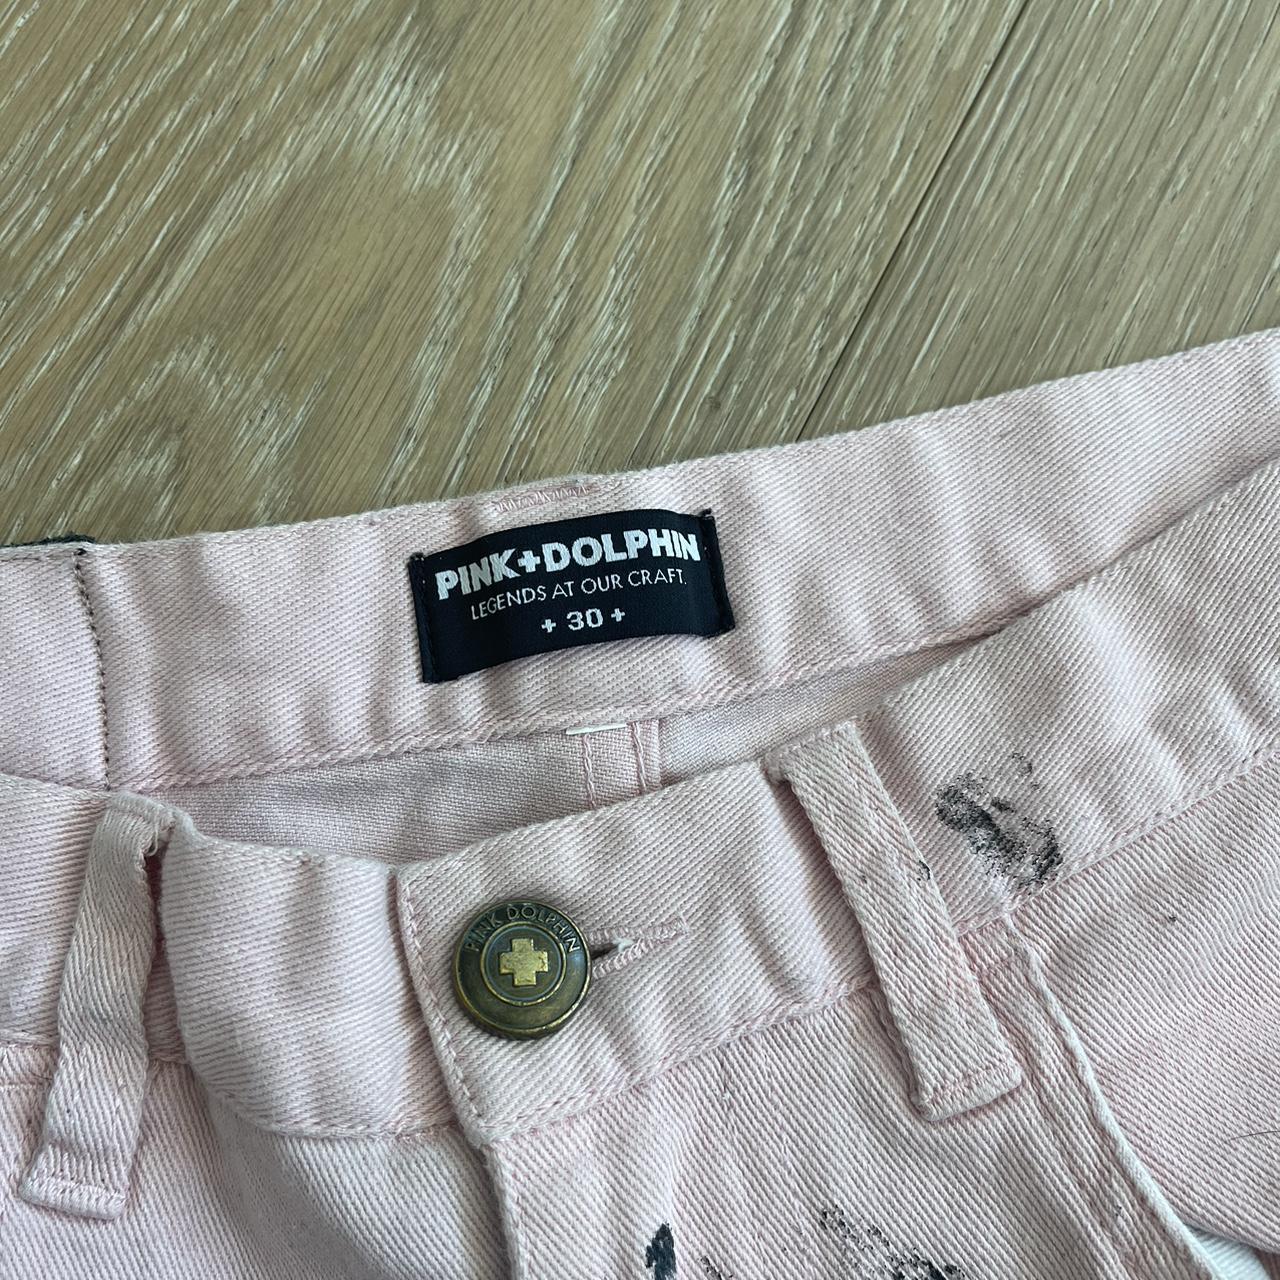 PINK + DOLPHIN CUSTOM PAINTED JEANS -no... - Depop